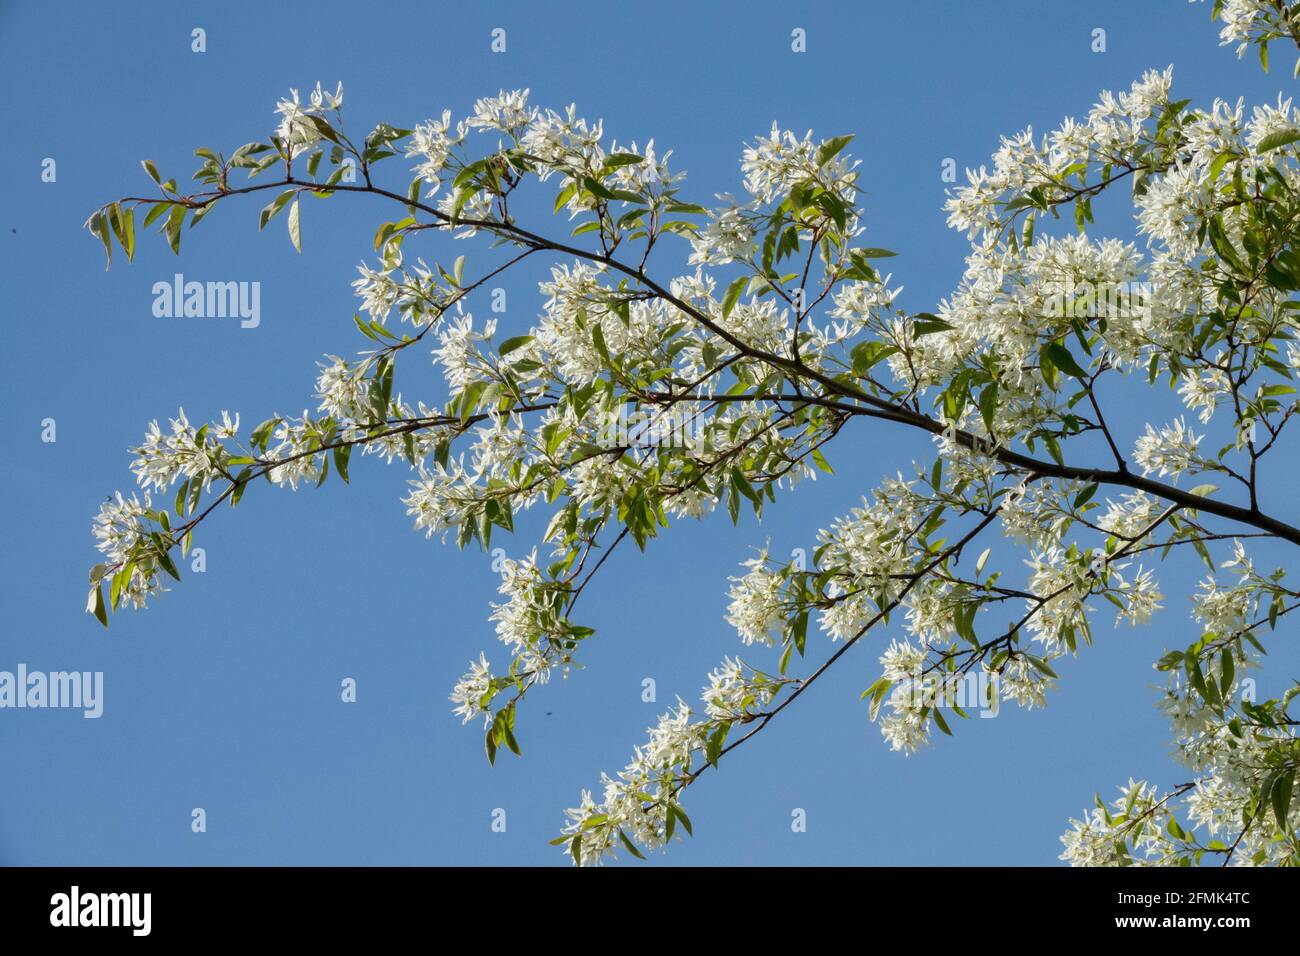 Serviceberry tree blooming branch Spring Juneberry Amelanchier lamarckii Snowy mespilus Stock Photo